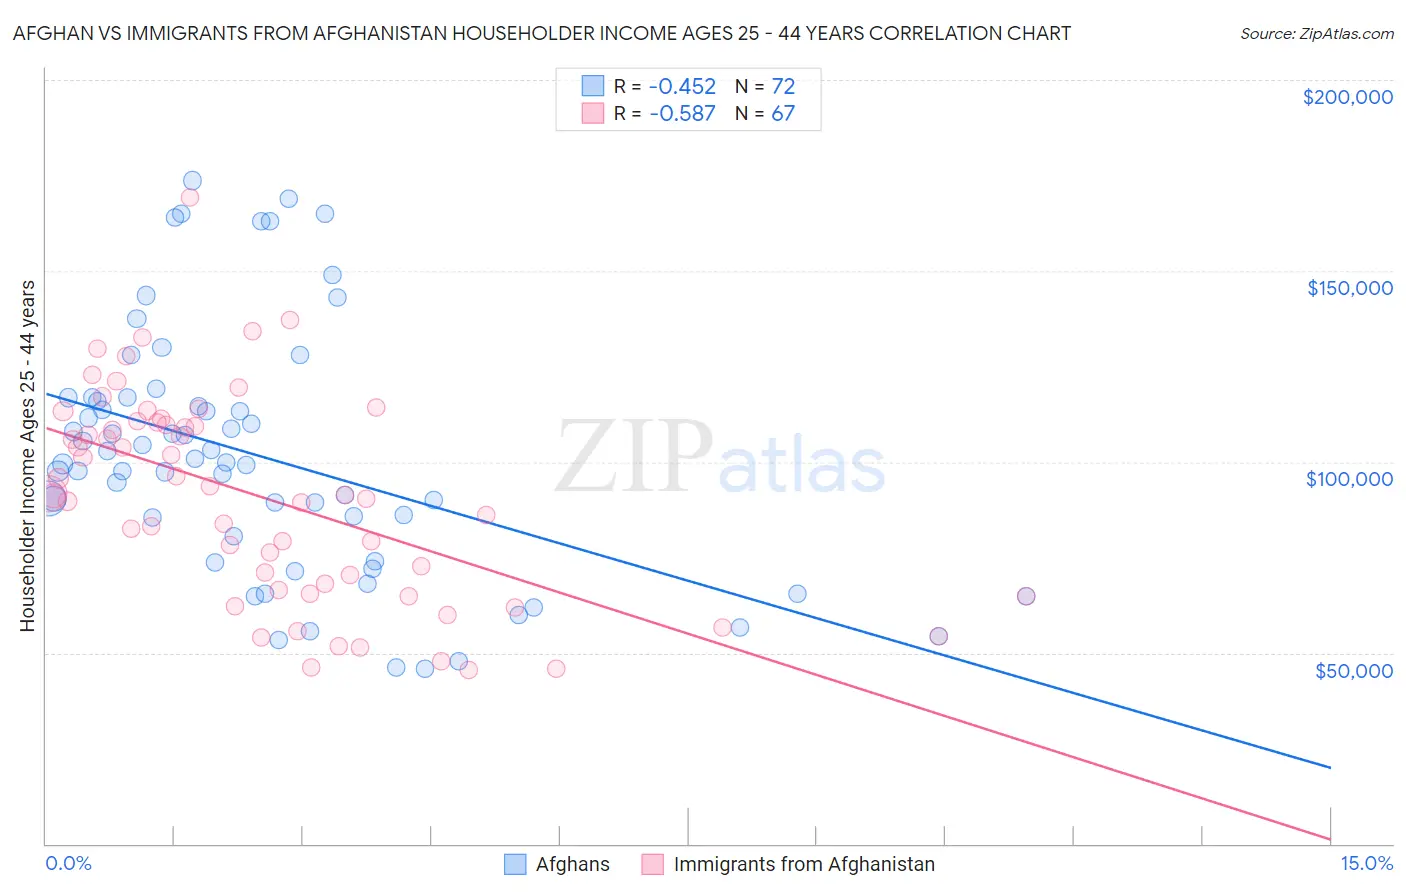 Afghan vs Immigrants from Afghanistan Householder Income Ages 25 - 44 years